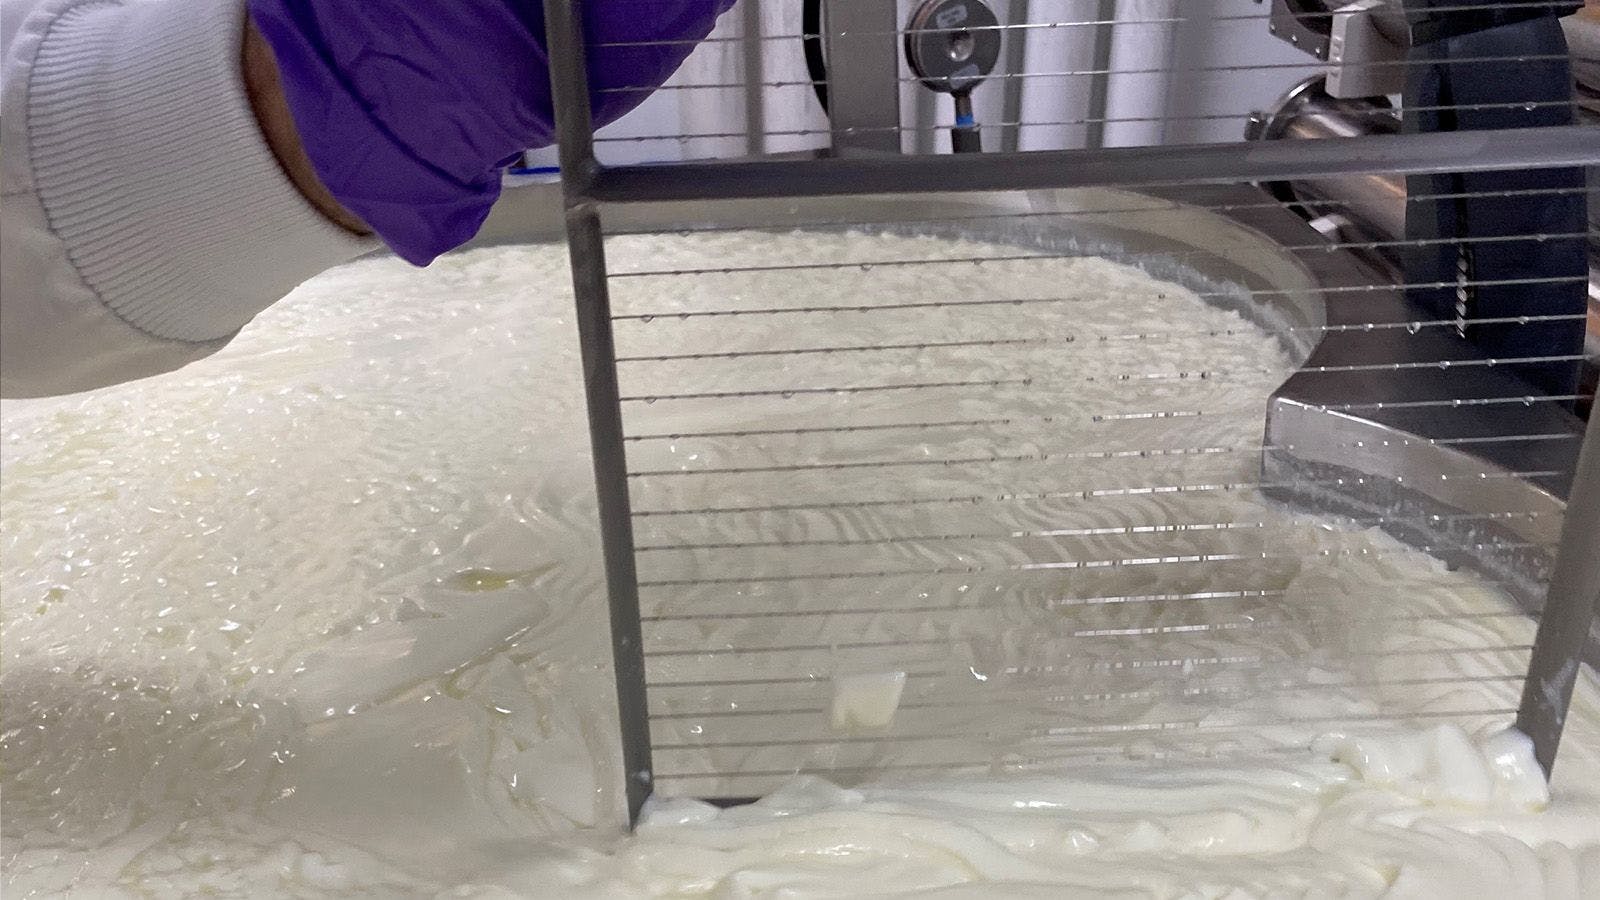 A cheesemaker cuts the vat using screens that create a grid pattern